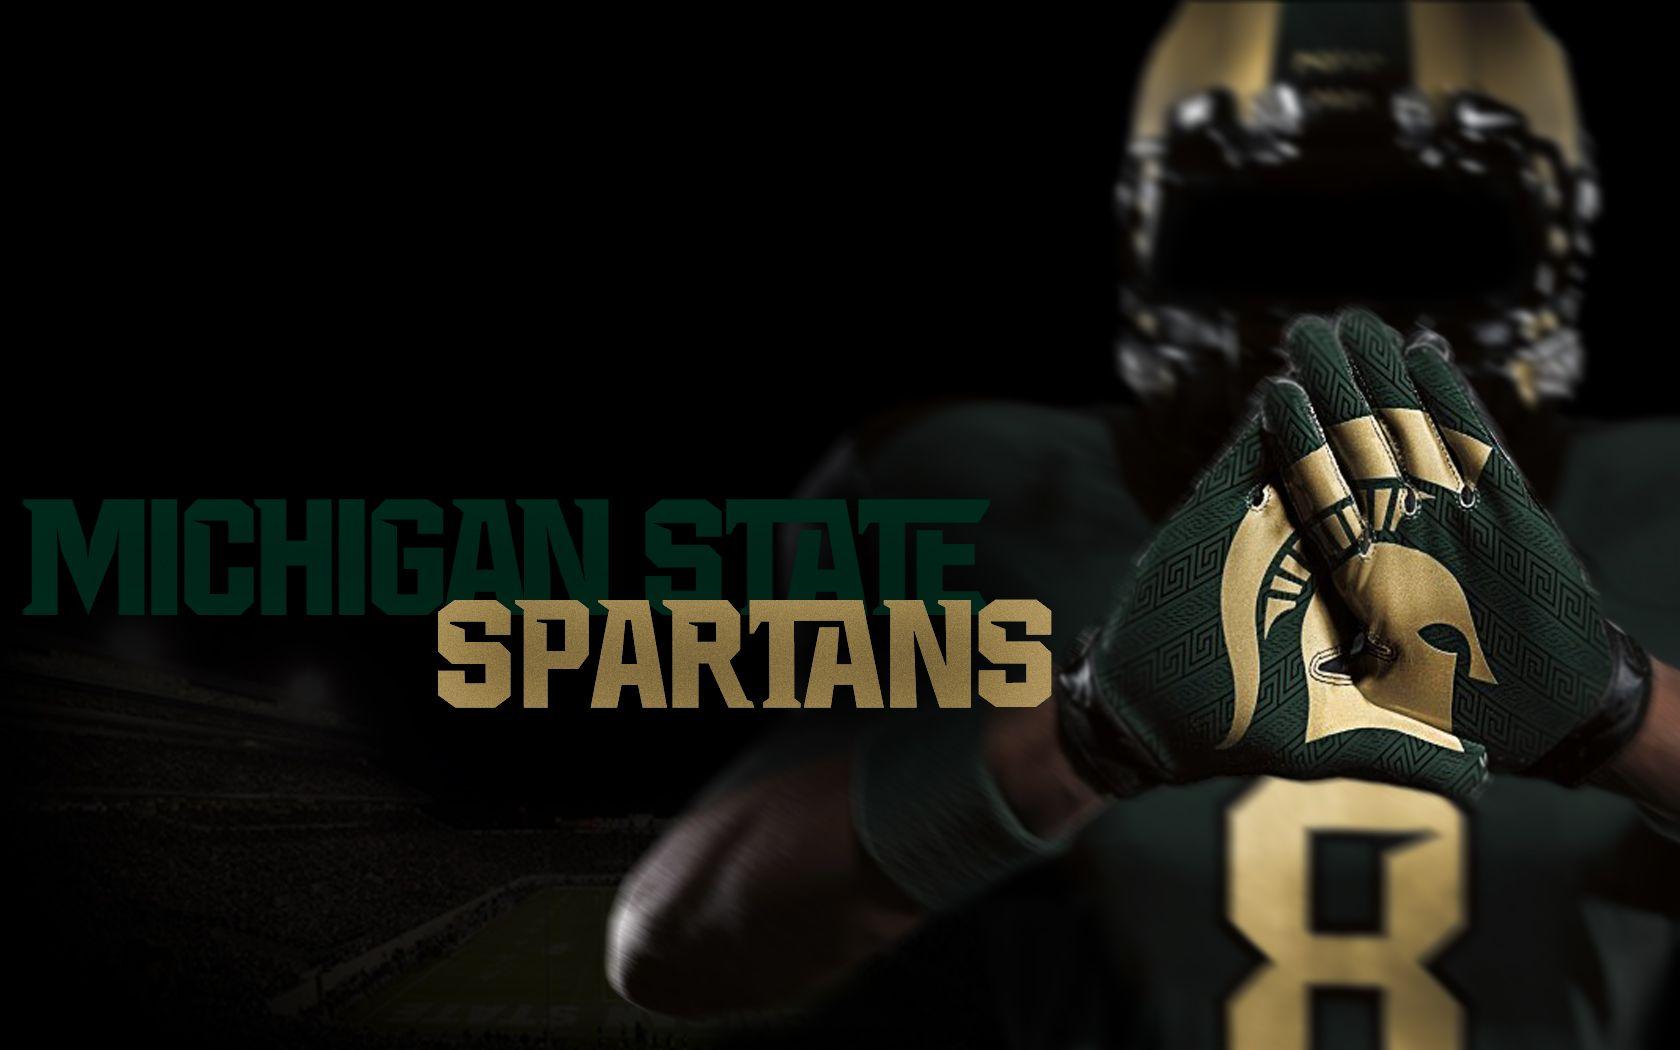 Michigan State Computer Wallpapers